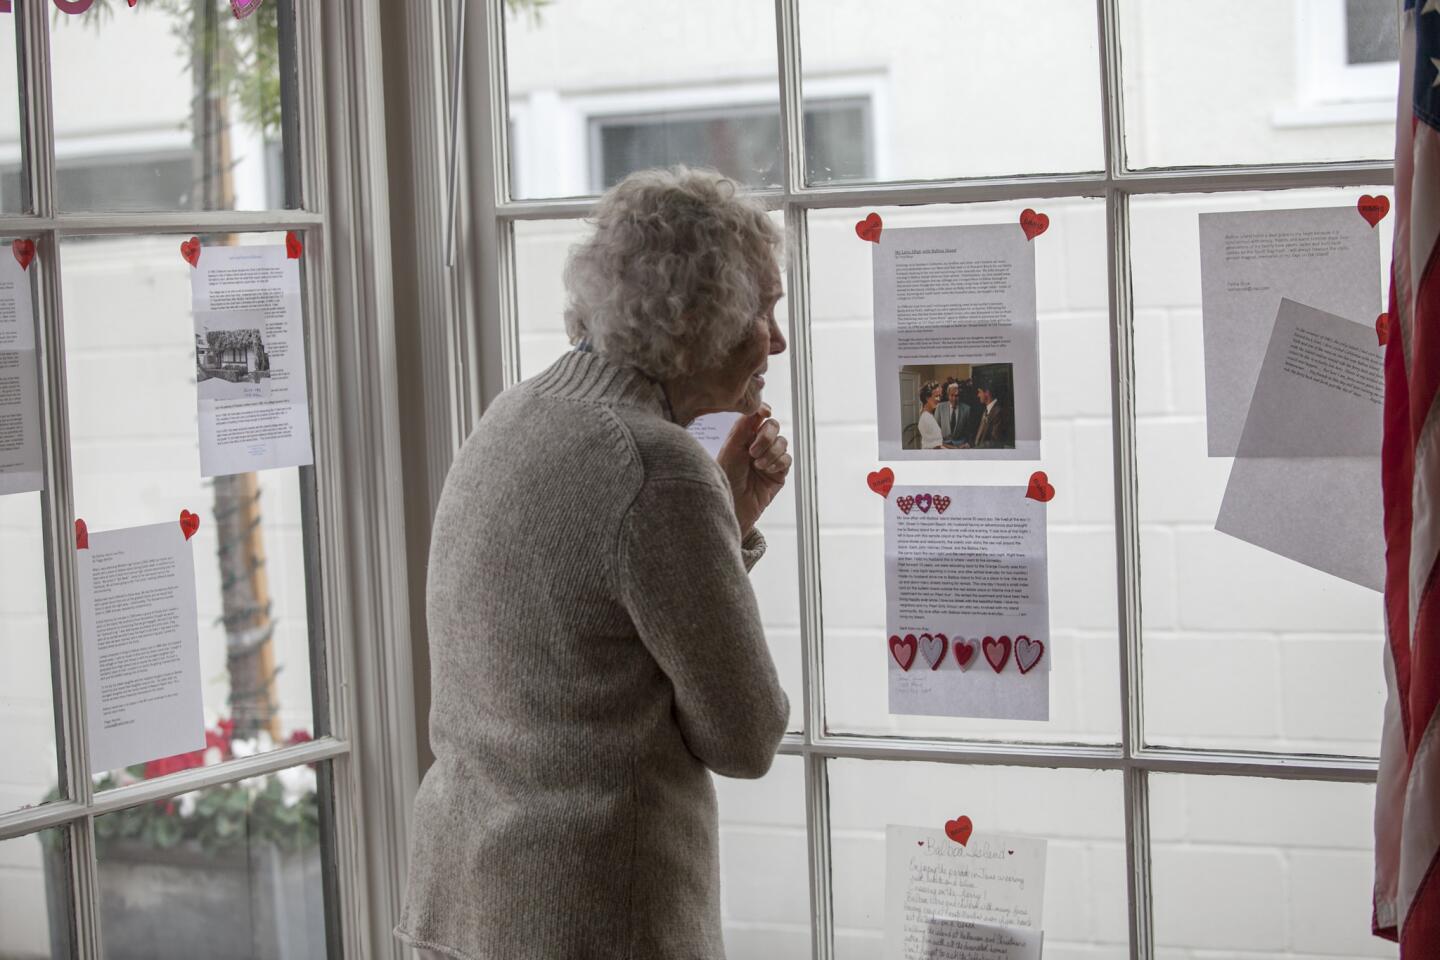 Peggy Marotta looks at love letters about Balboa Island at the Balboa Island Museum & Historical Society on Saturday, February 15. (Scott Smeltzer, Daily Pilot)